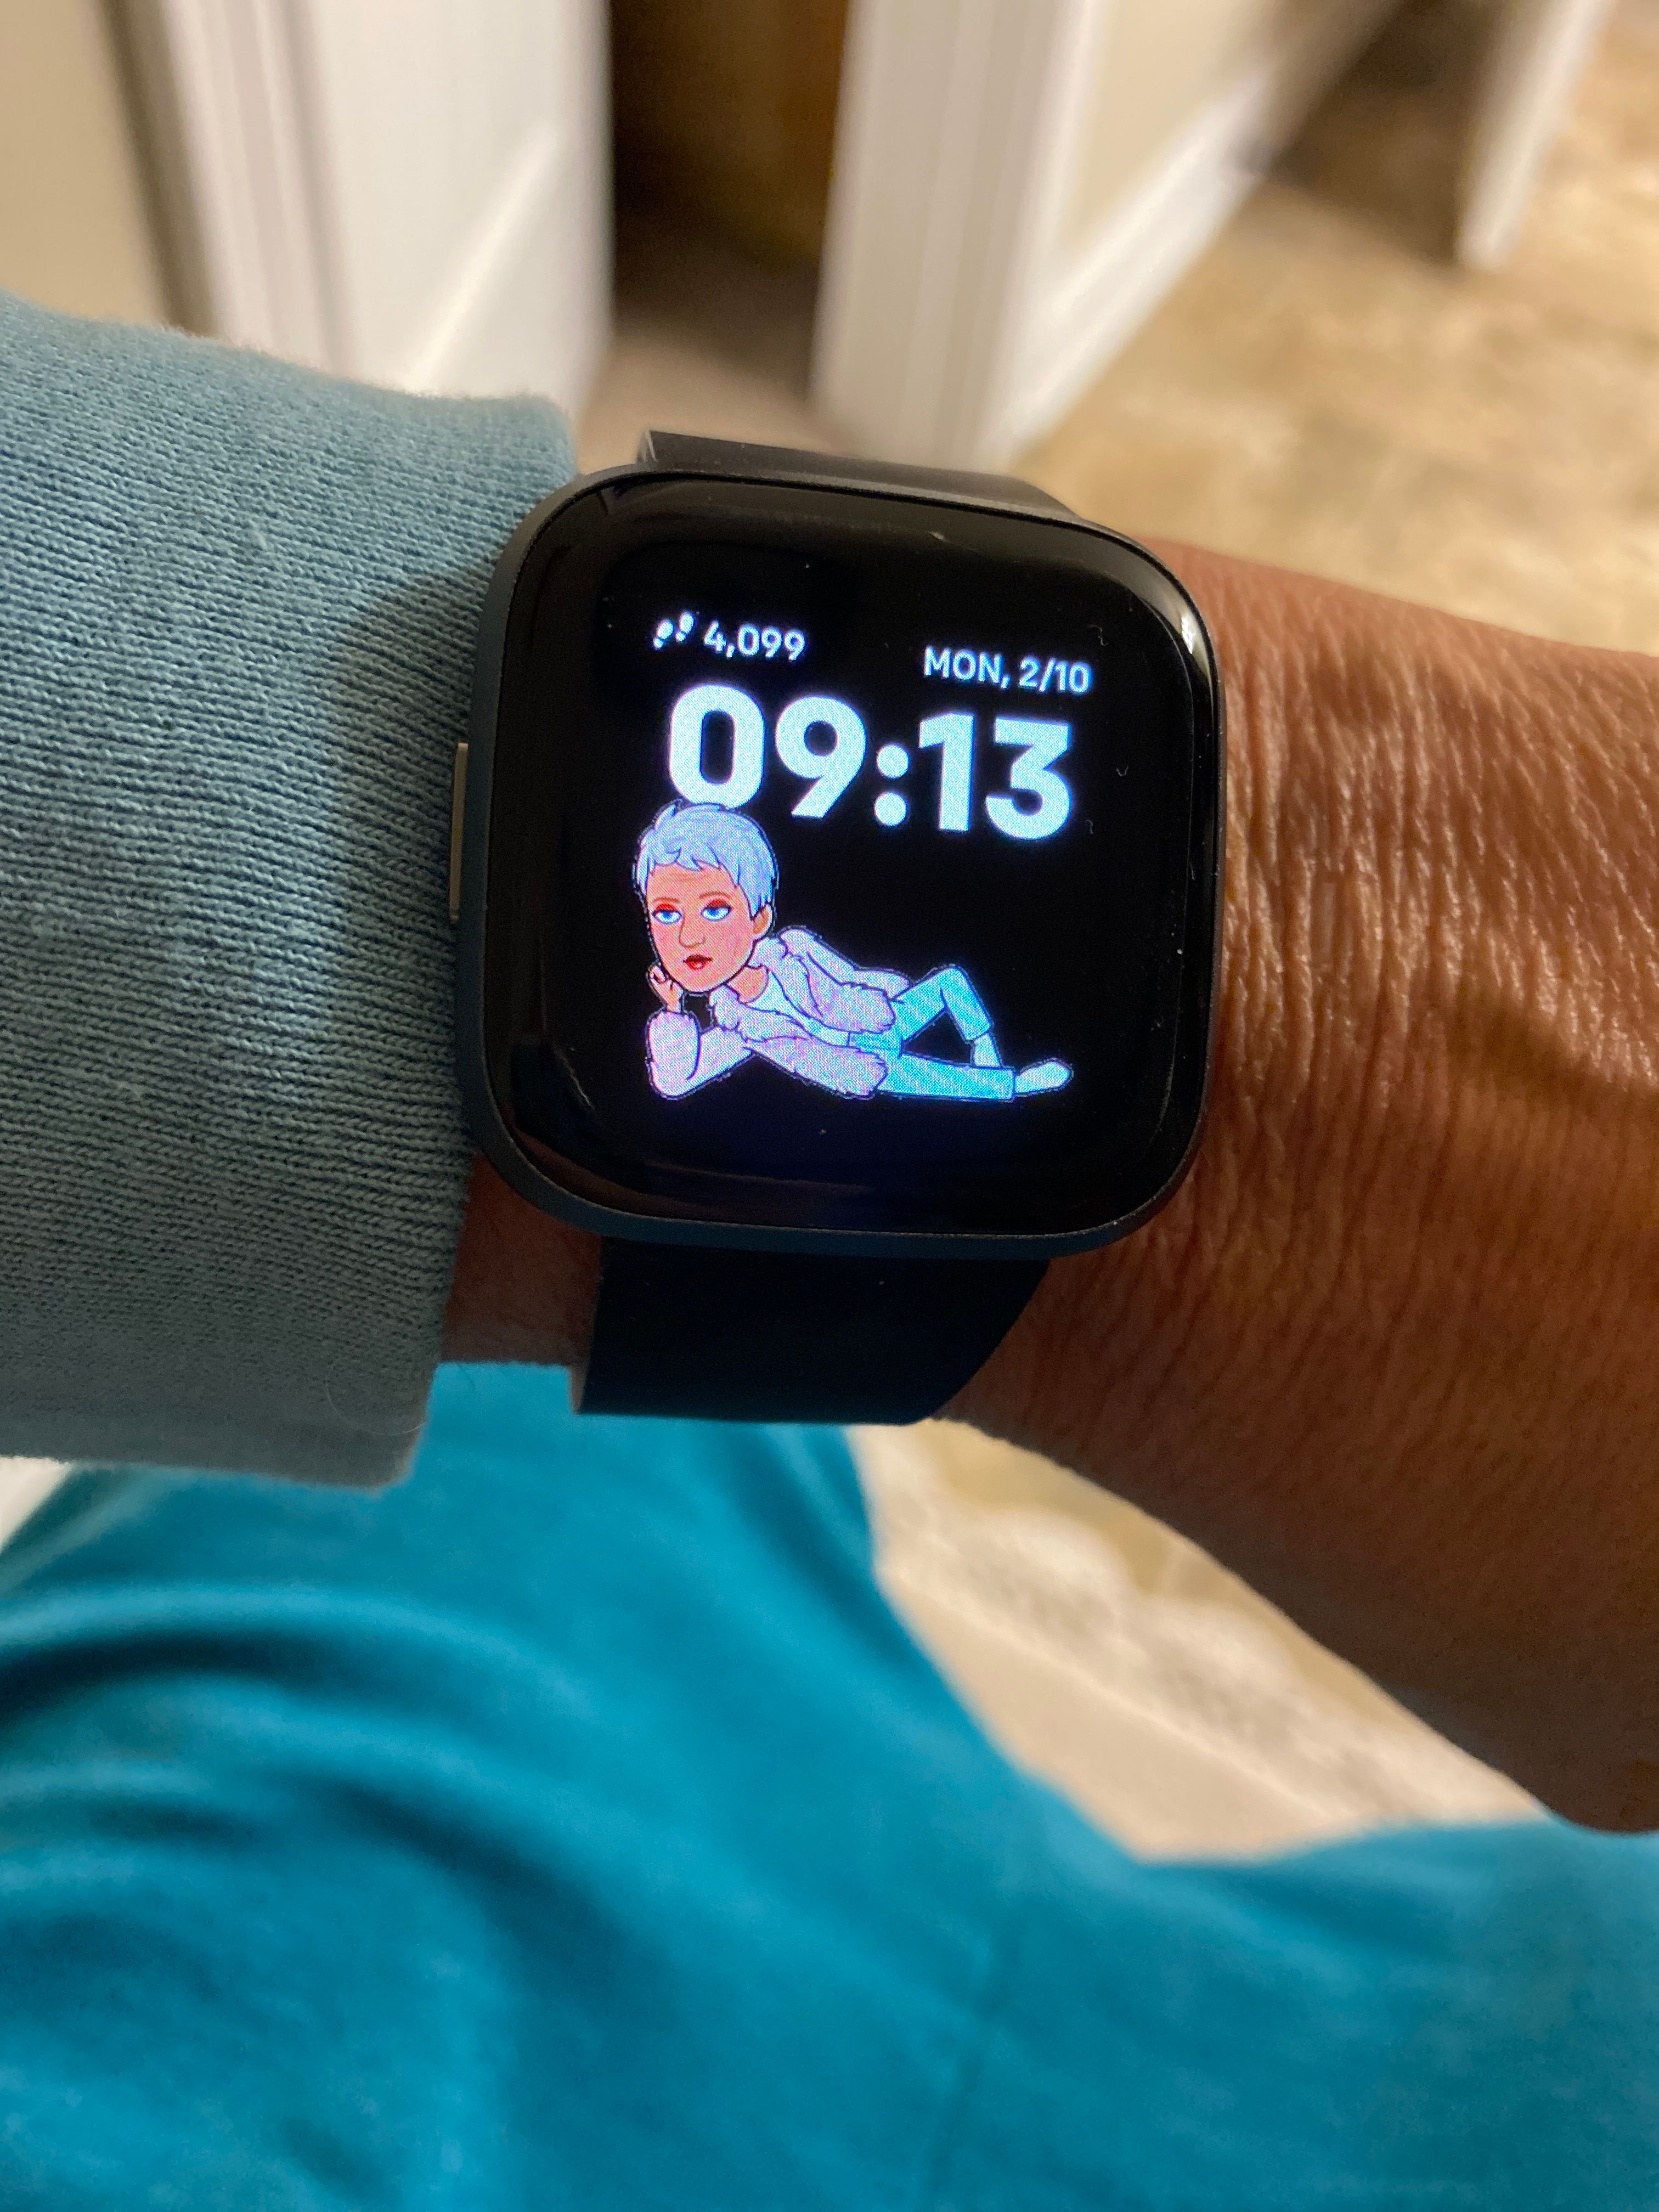 Solved: Versa stops tracking exercise 